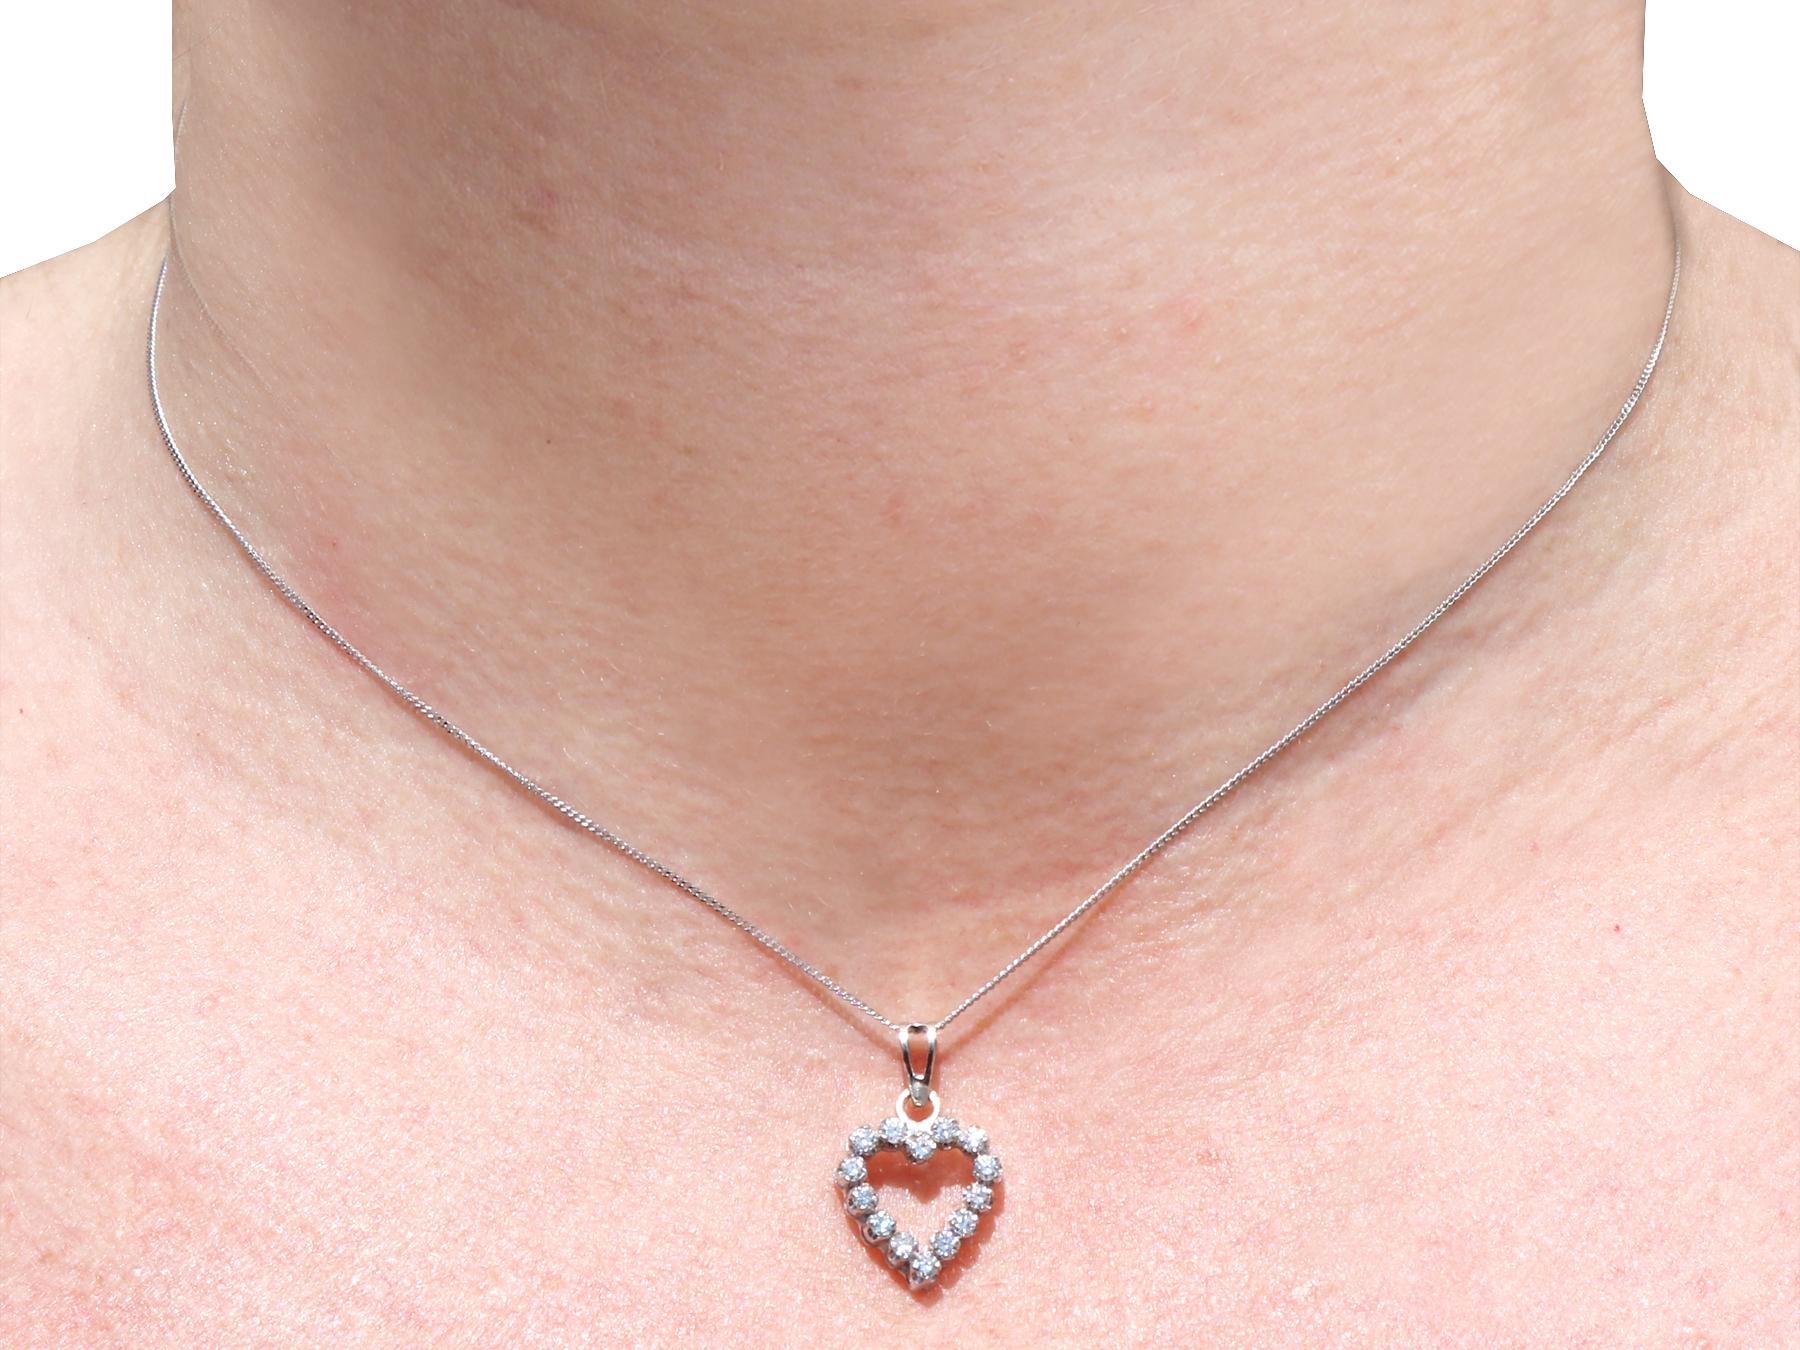 Vintage 1980s Diamond and 18K White Gold Heart Pendant In Excellent Condition For Sale In Jesmond, Newcastle Upon Tyne